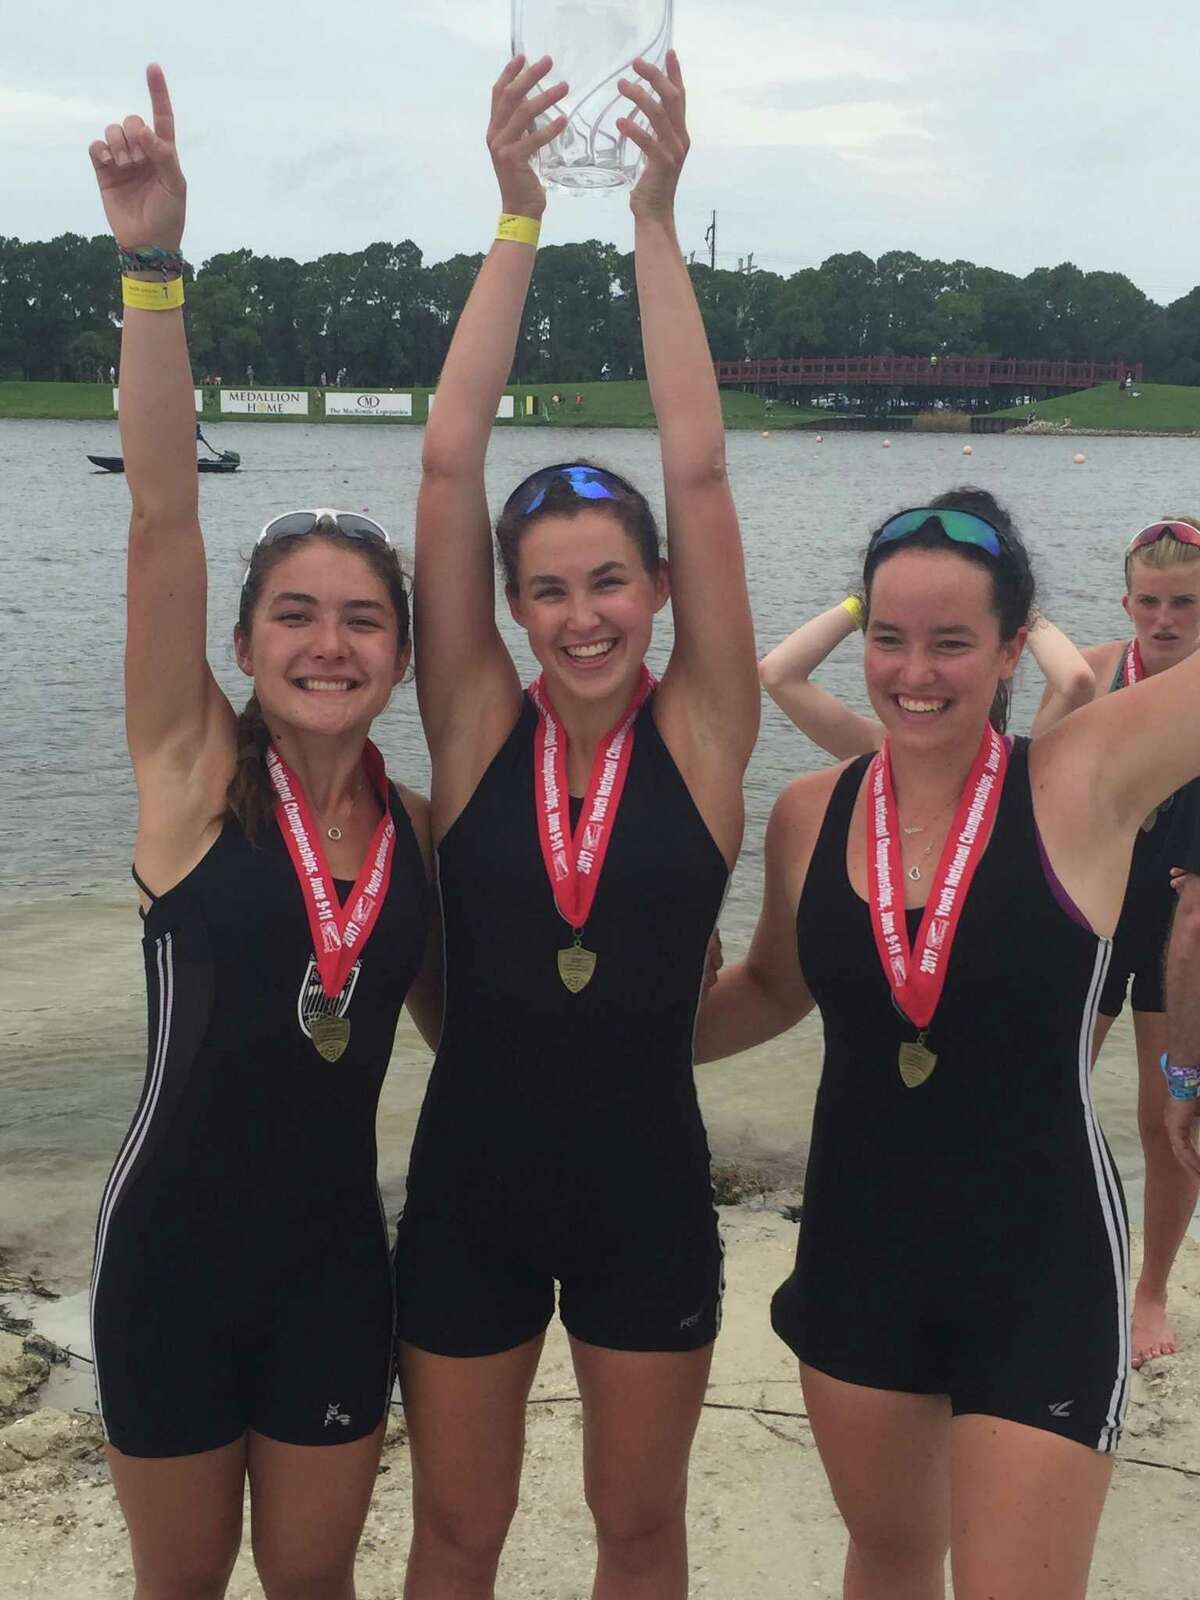 Caitlin Esse of New Canaan (R) celebrates with teammates after winning the womens youth 8+ national championship.